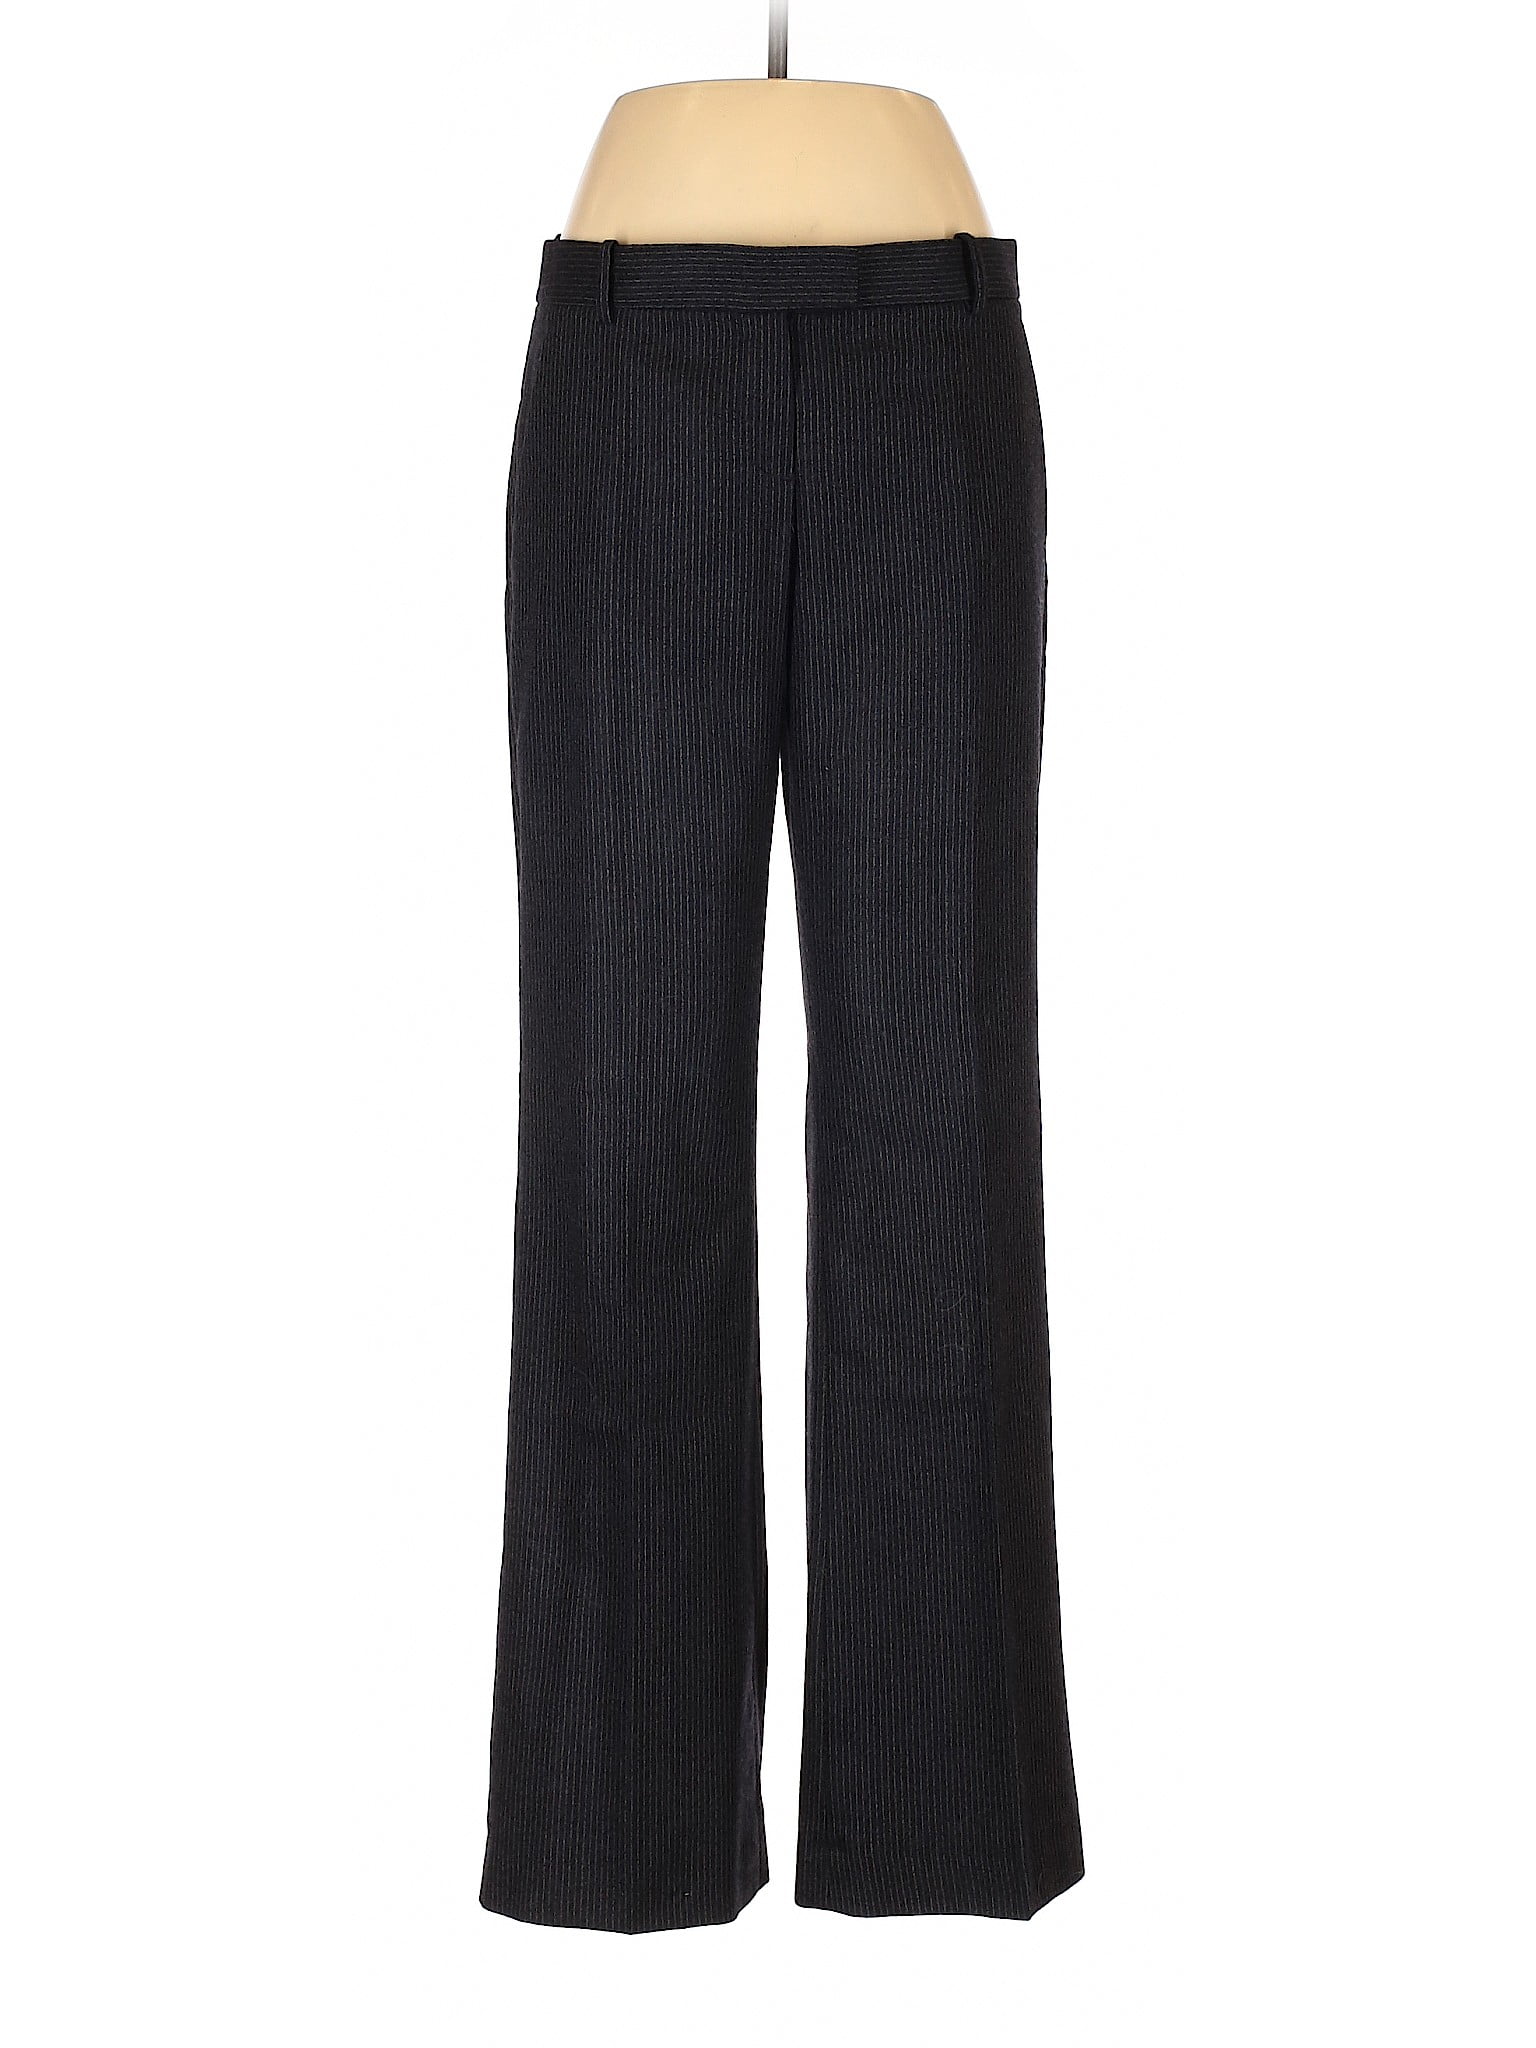 Theory - Pre-Owned Theory Women's Size 8 Wool Pants - Walmart.com ...